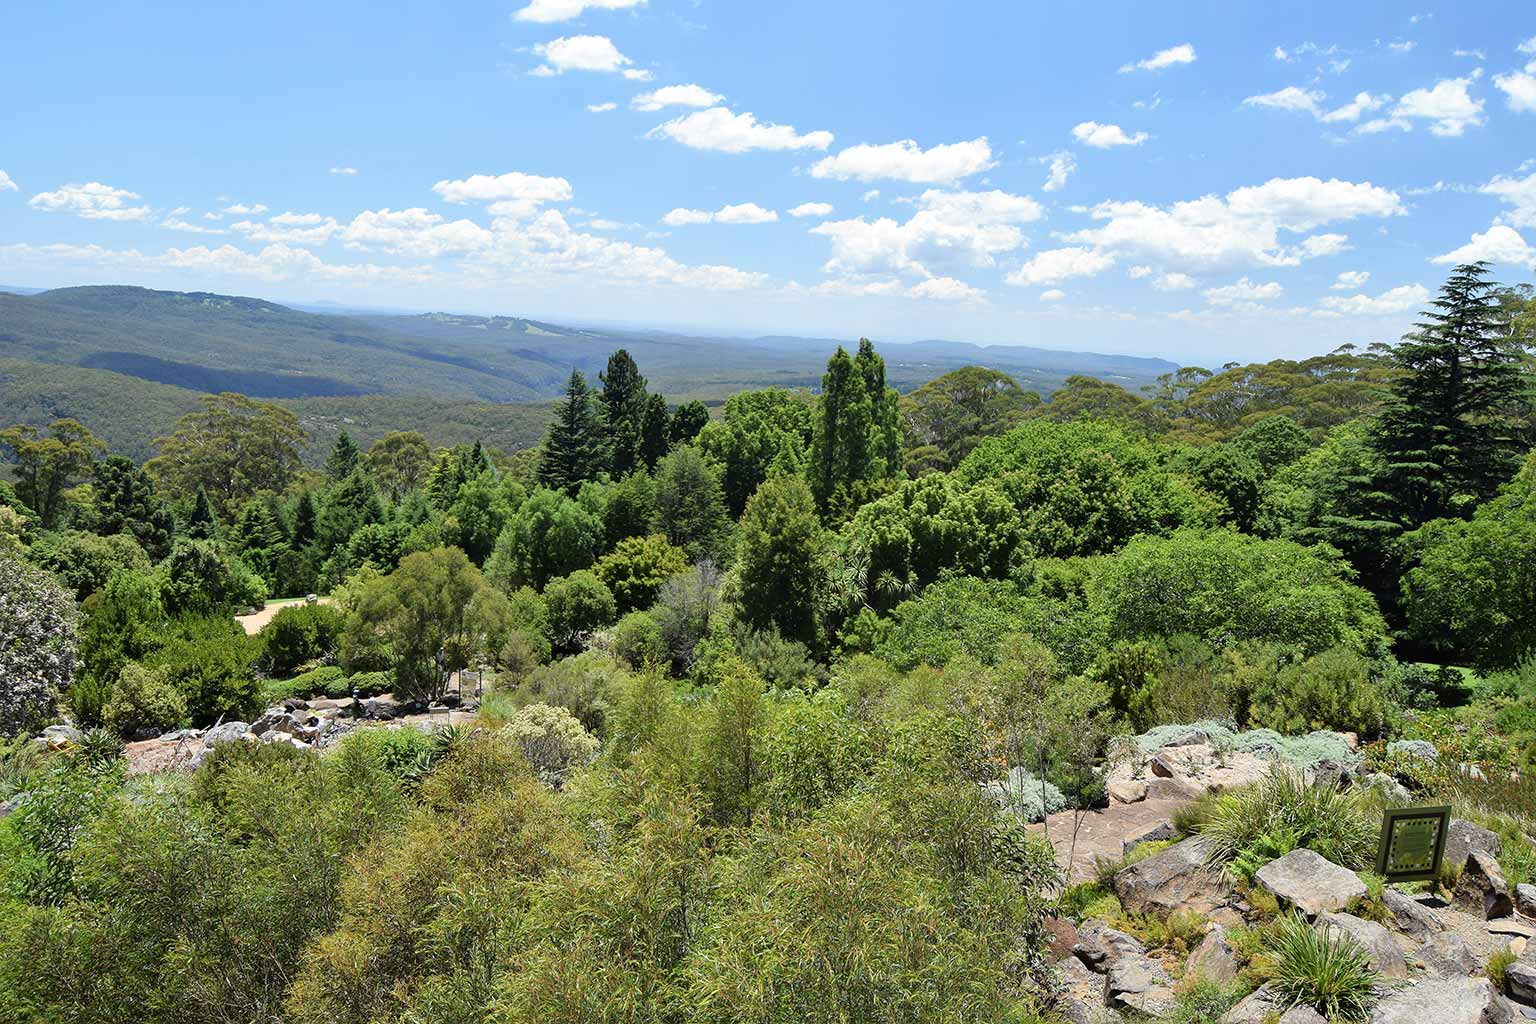 Blue Mountains landscape in New South Wales, Australia